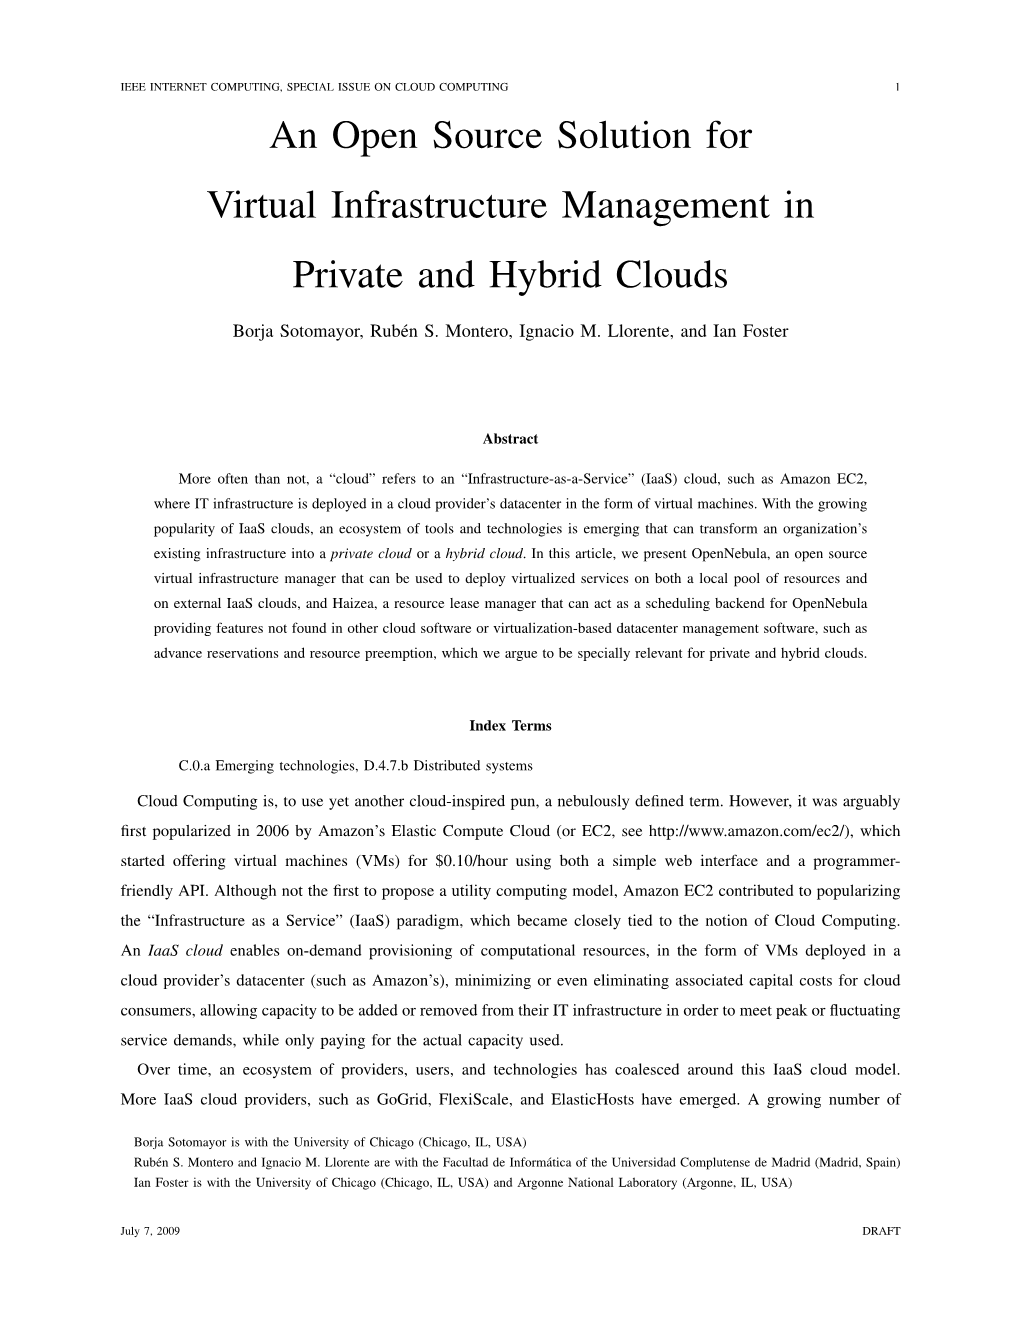 An Open Source Solution for Virtual Infrastructure Management in Private and Hybrid Clouds